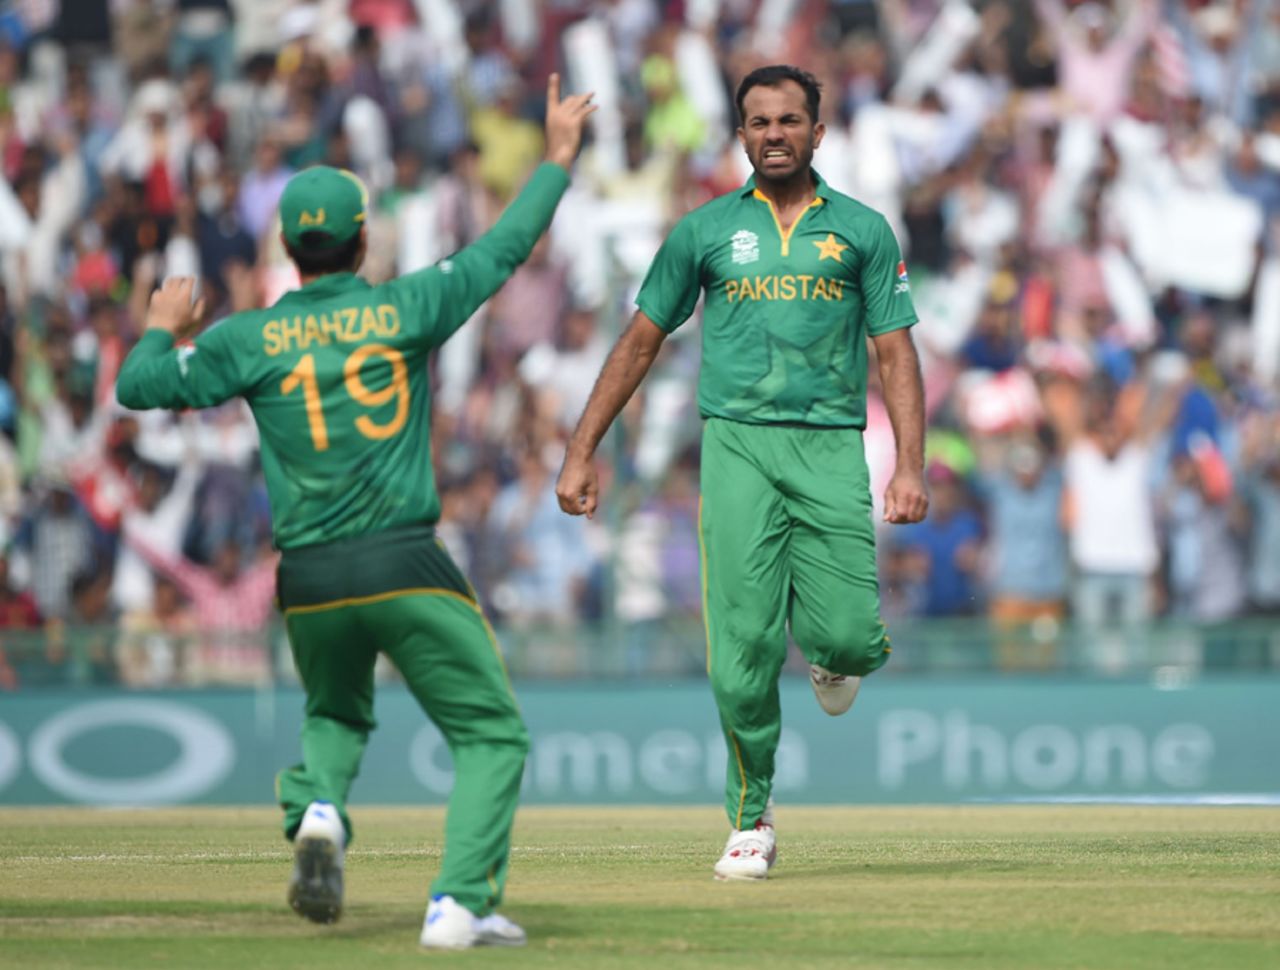 Wahab Riaz is pumped up after bowling David Warner for 9, Australia v Pakistan, World T20 2016, Group 2, Mohali, March 25, 2016